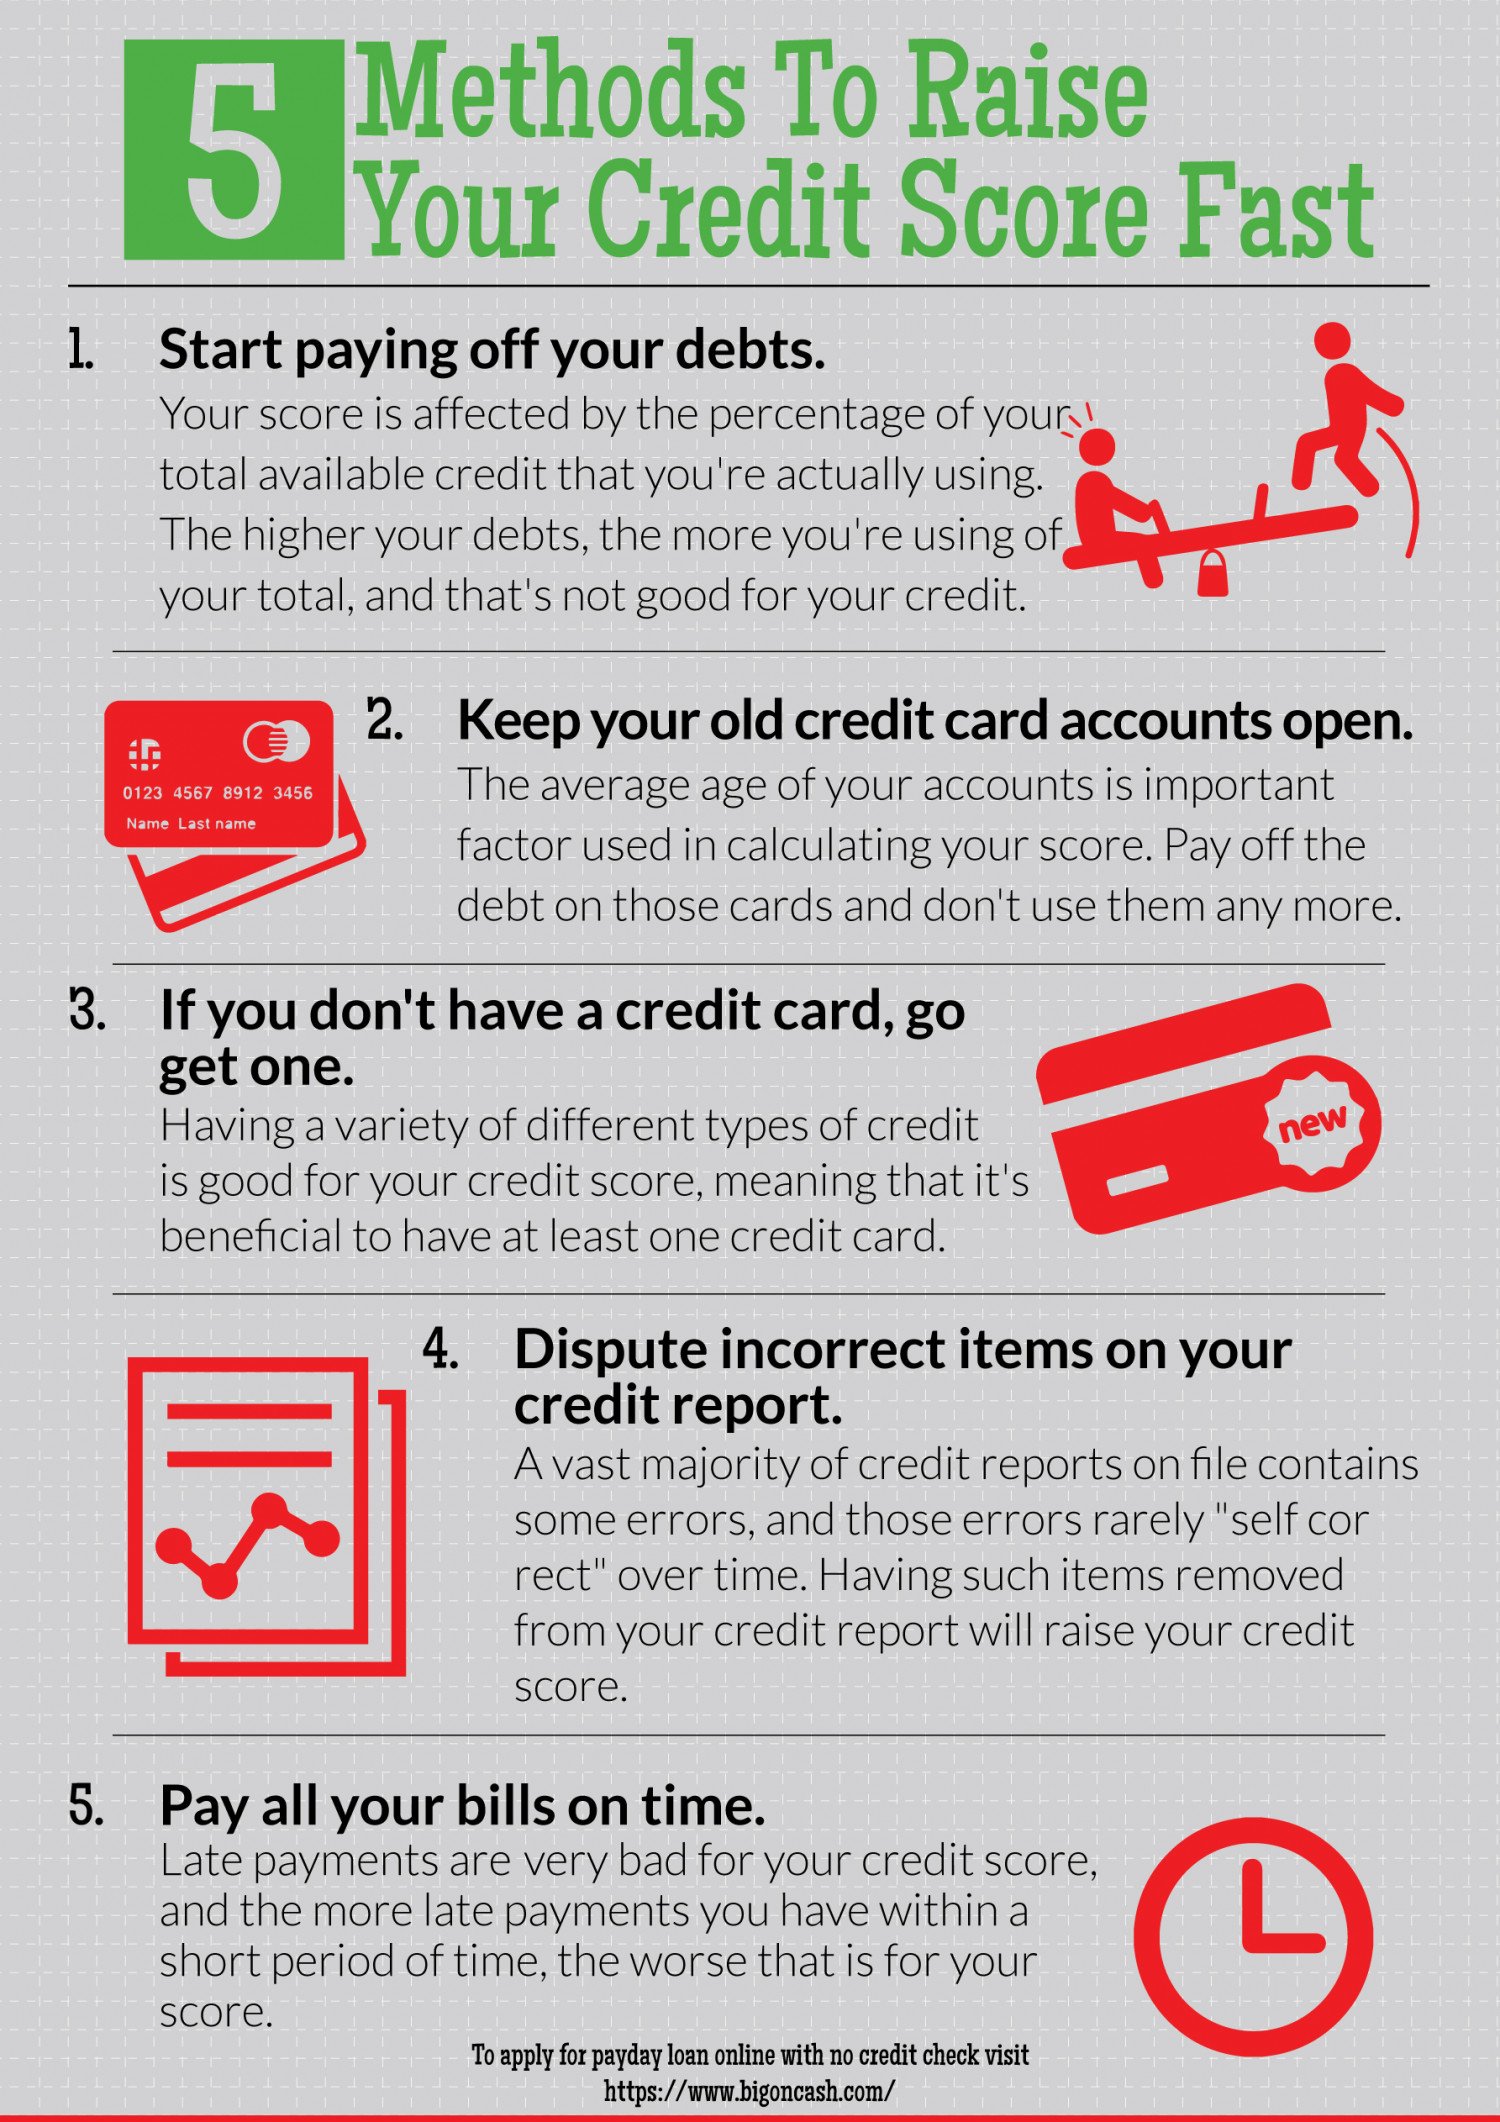 How To Raise Your Credit Rating Fast With Five Easy Steps